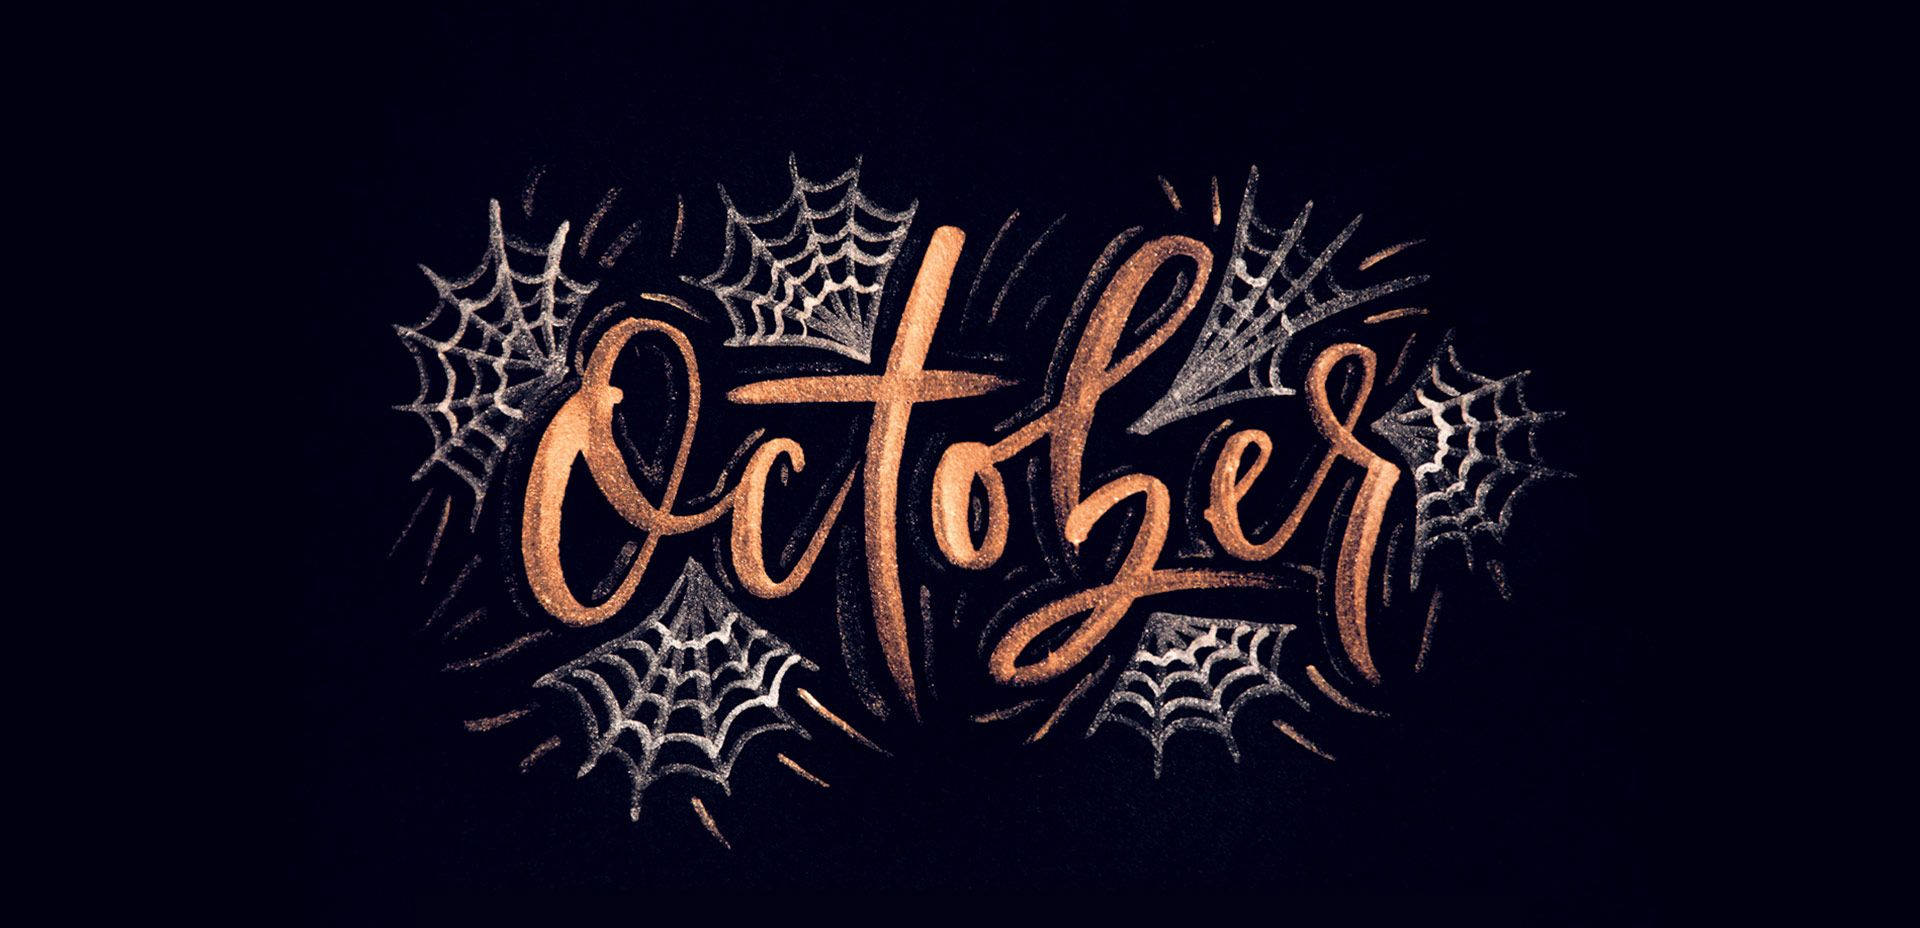 October 1920X928 Wallpaper and Background Image